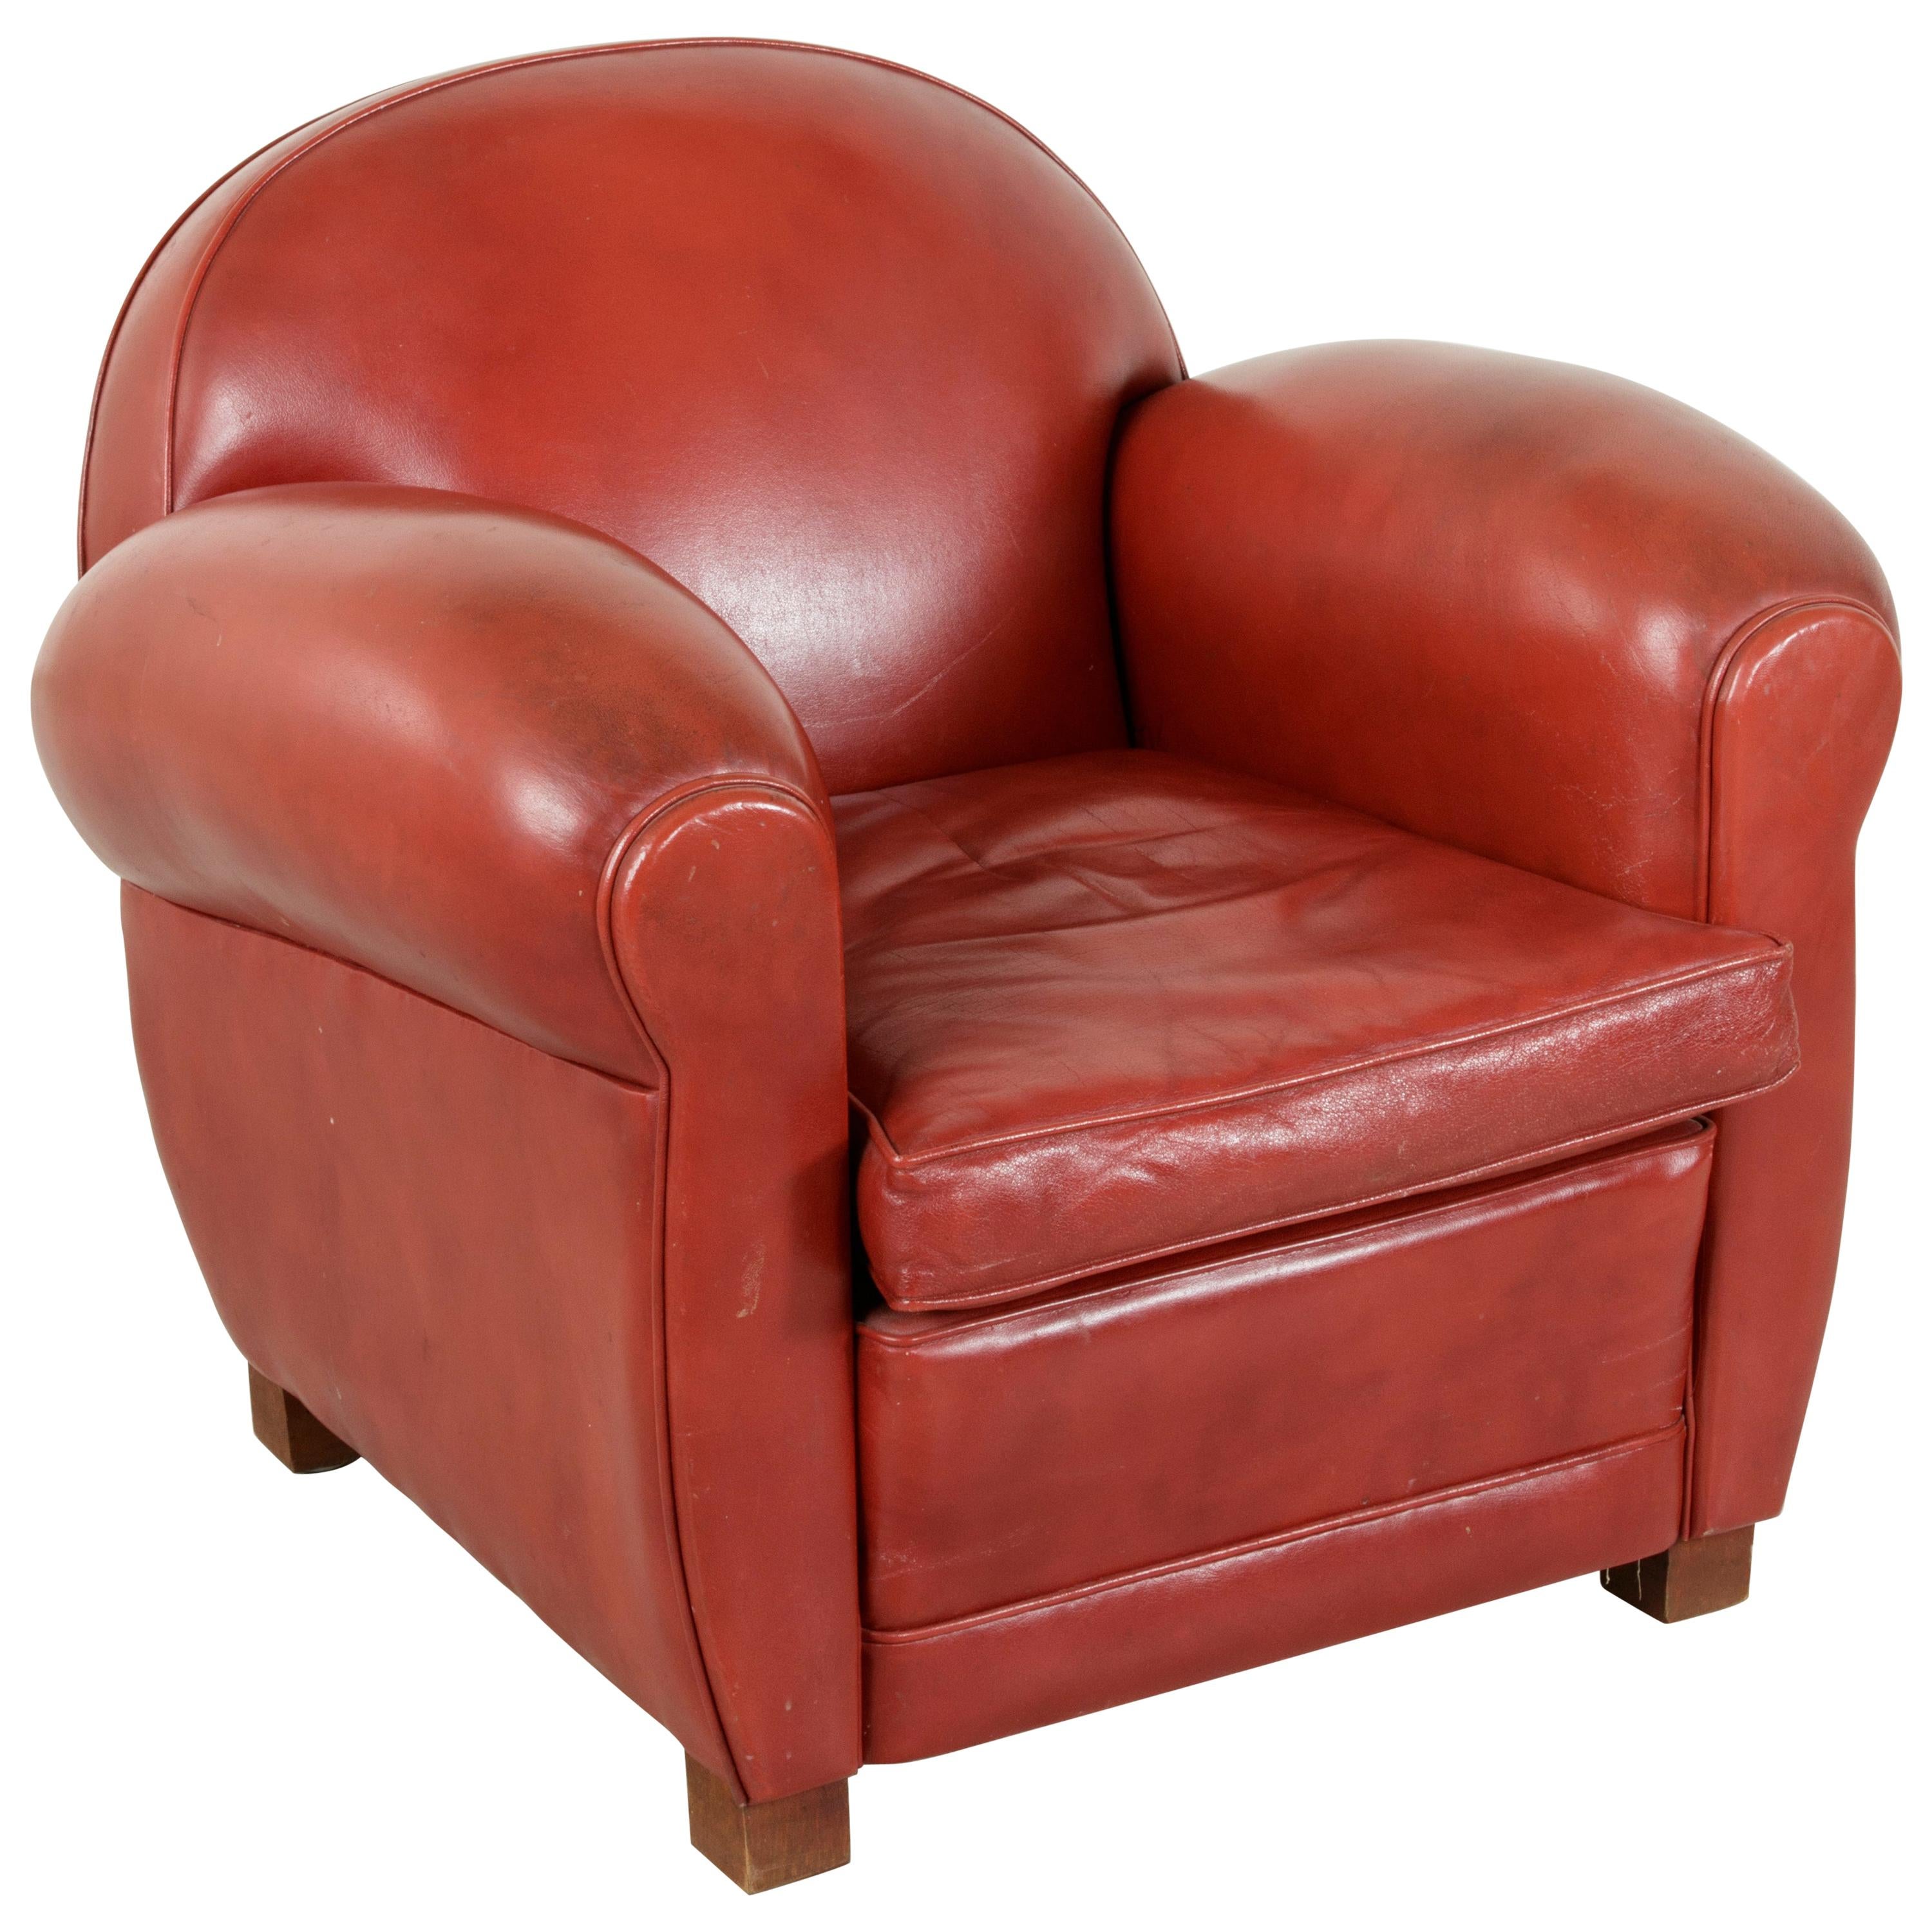 Midcentury French Art Deco Red Leather Club Chair or Lounge Chair, circa 1950